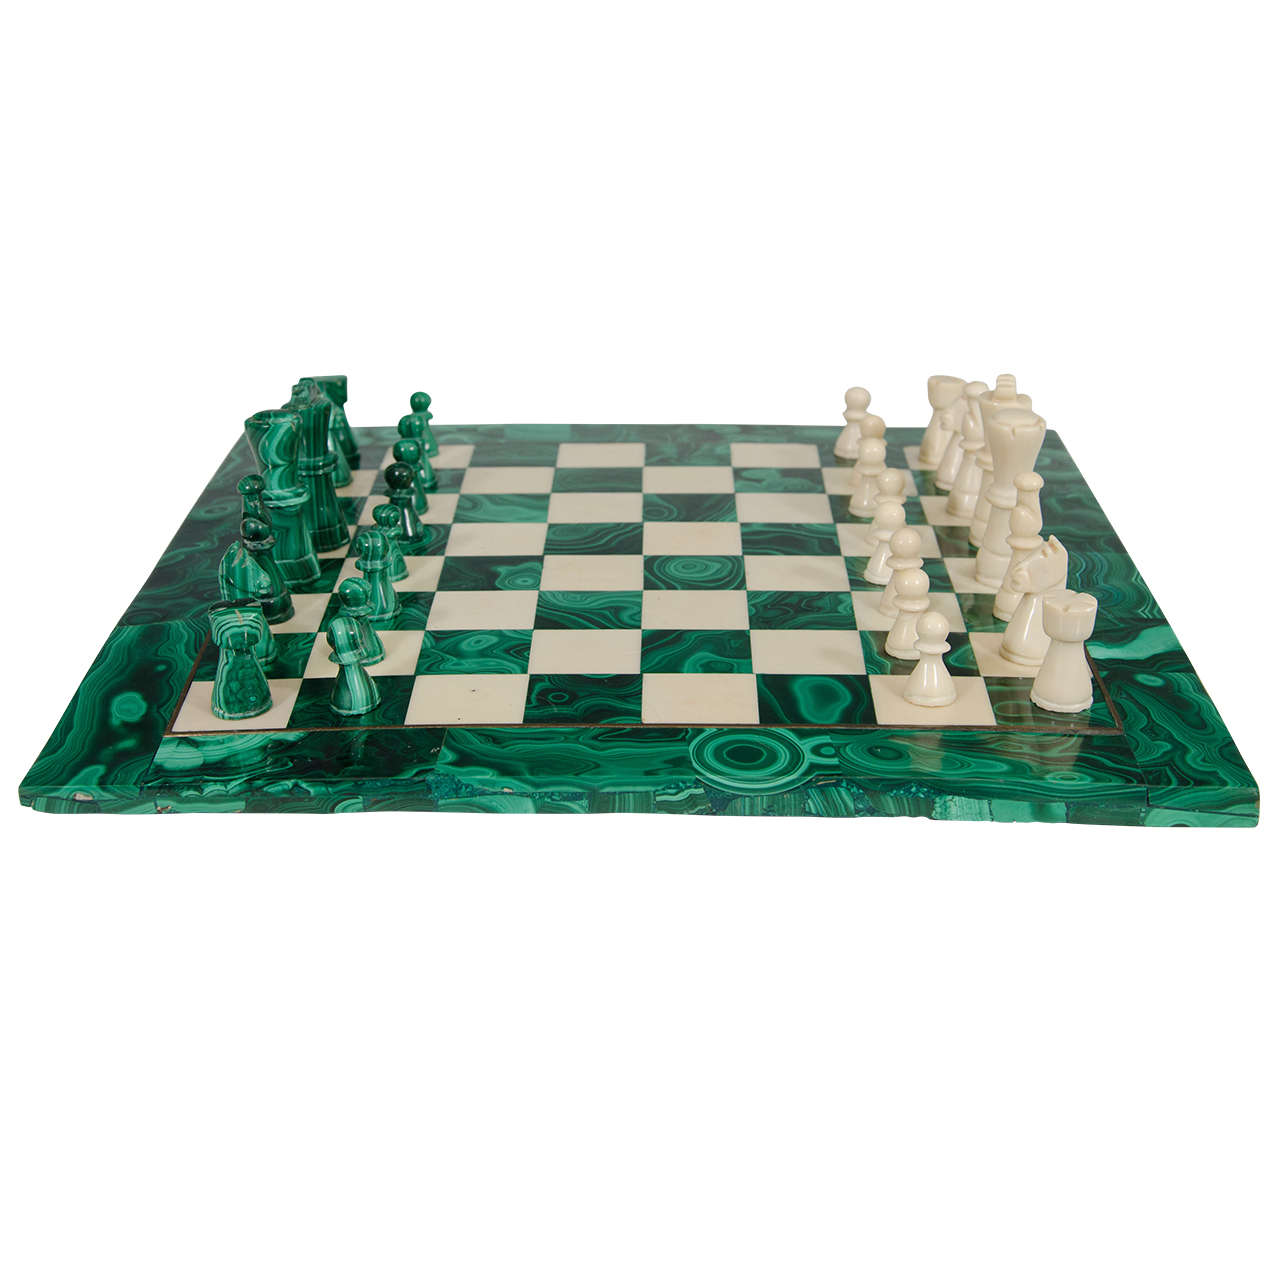 Midcentury Malachite and Marble Chess Set Game Board and Pieces